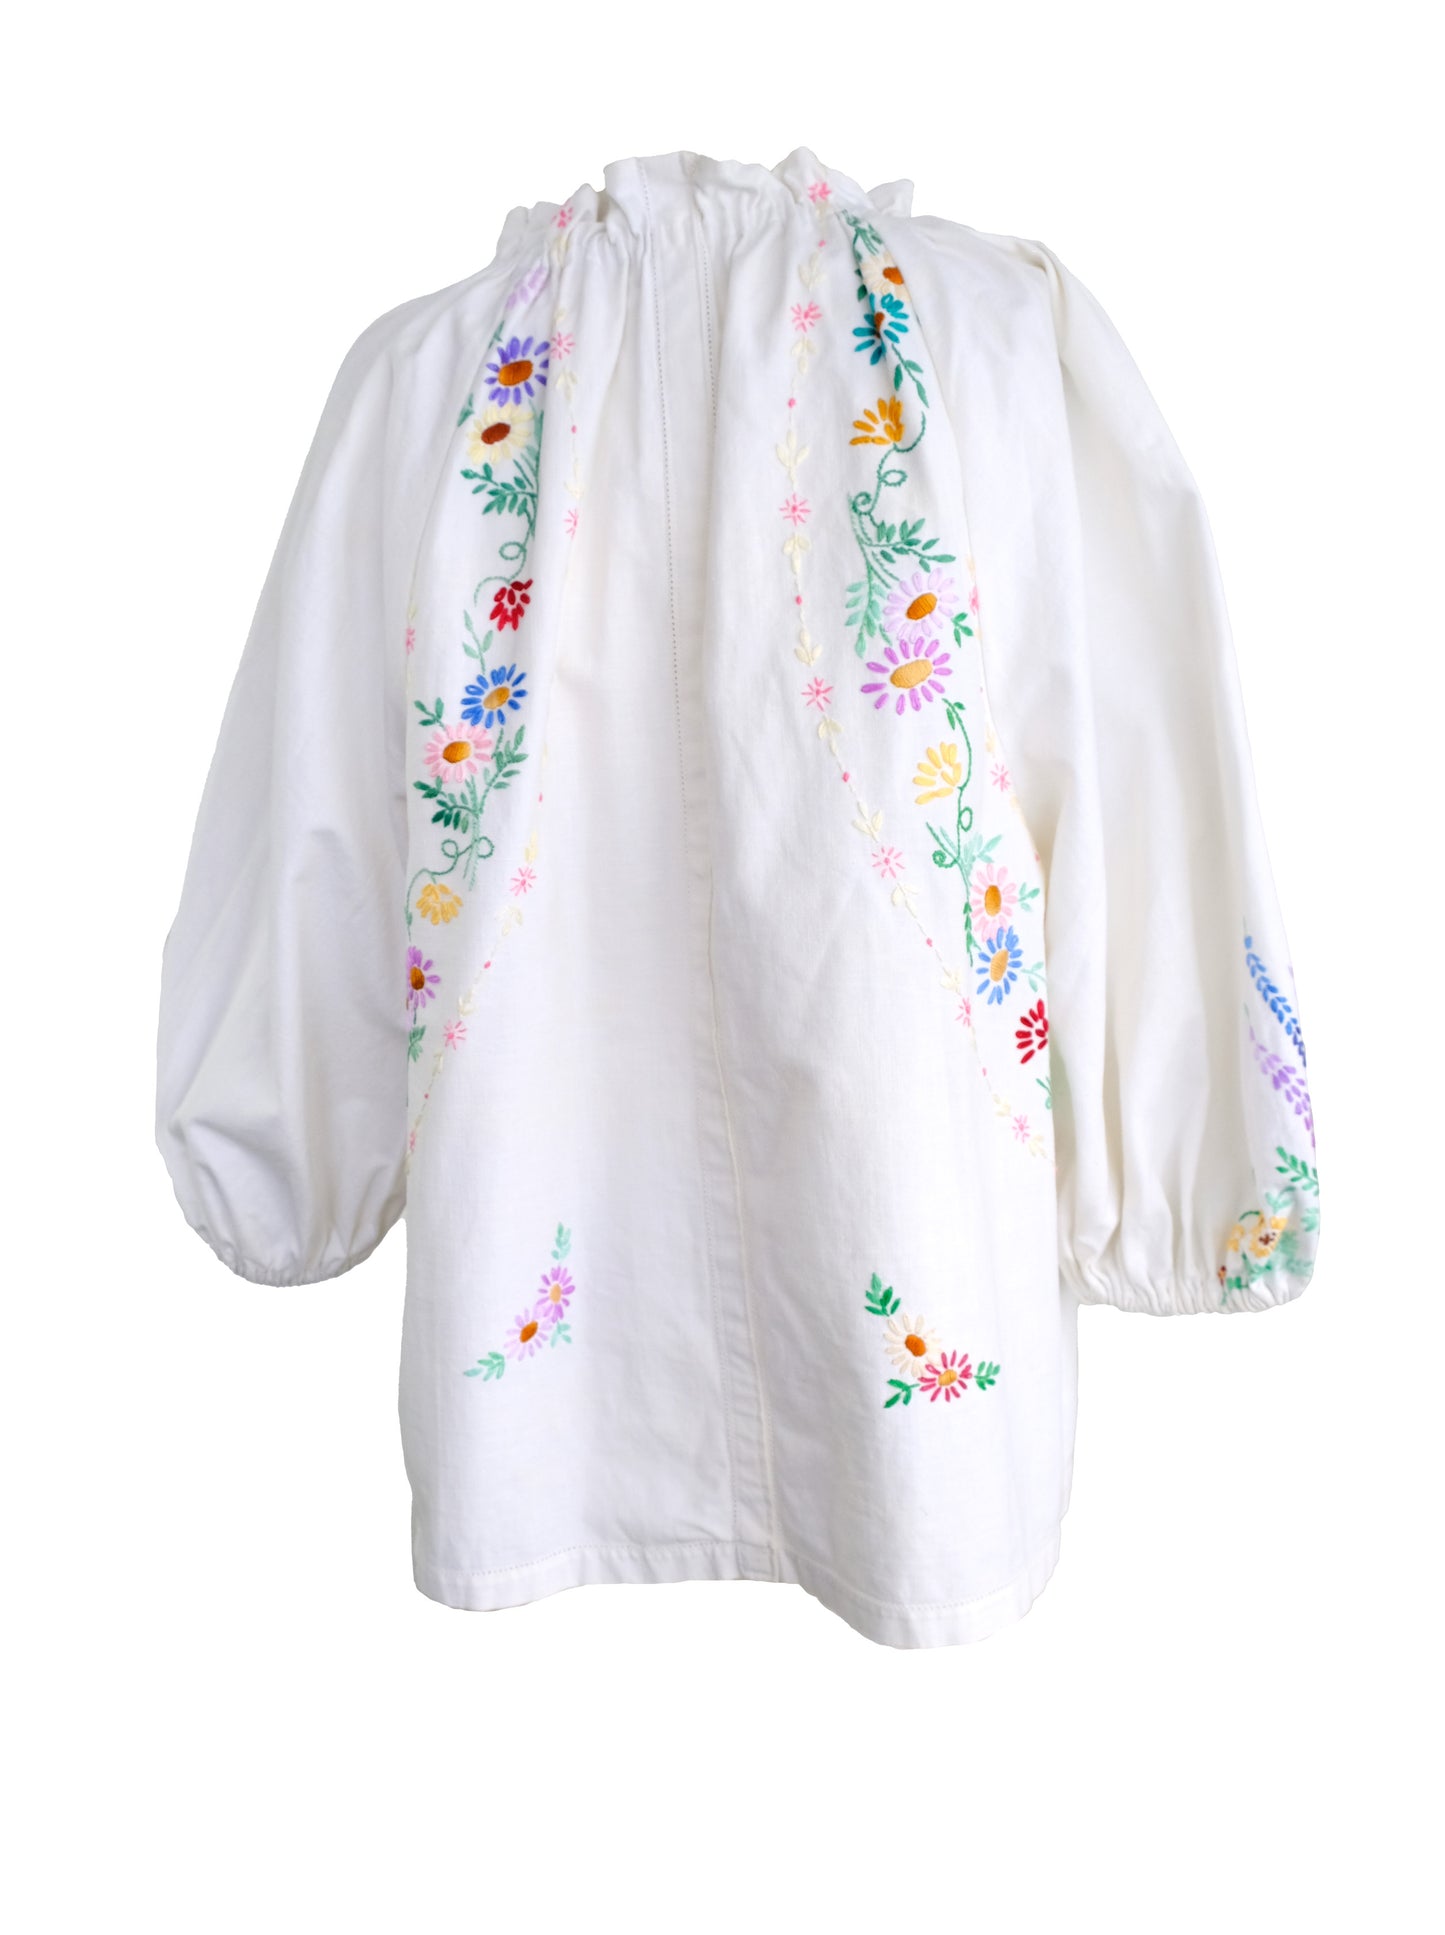 Leila Ray Upcycled Embroidered Peasant Blouse, Medium